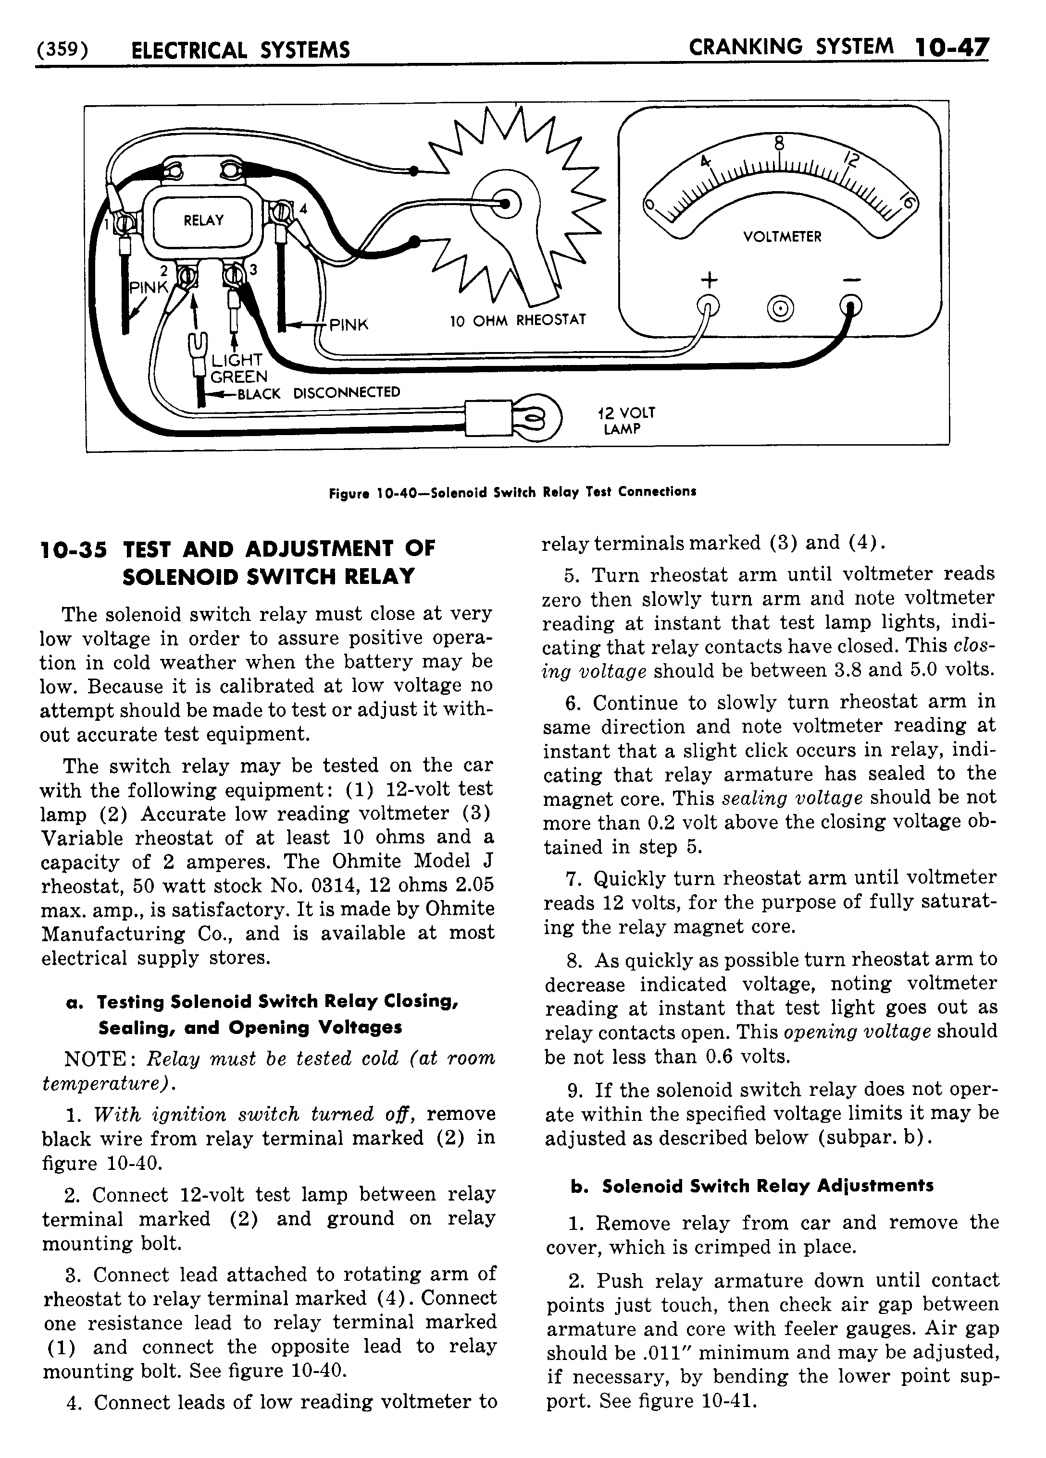 n_11 1954 Buick Shop Manual - Electrical Systems-047-047.jpg